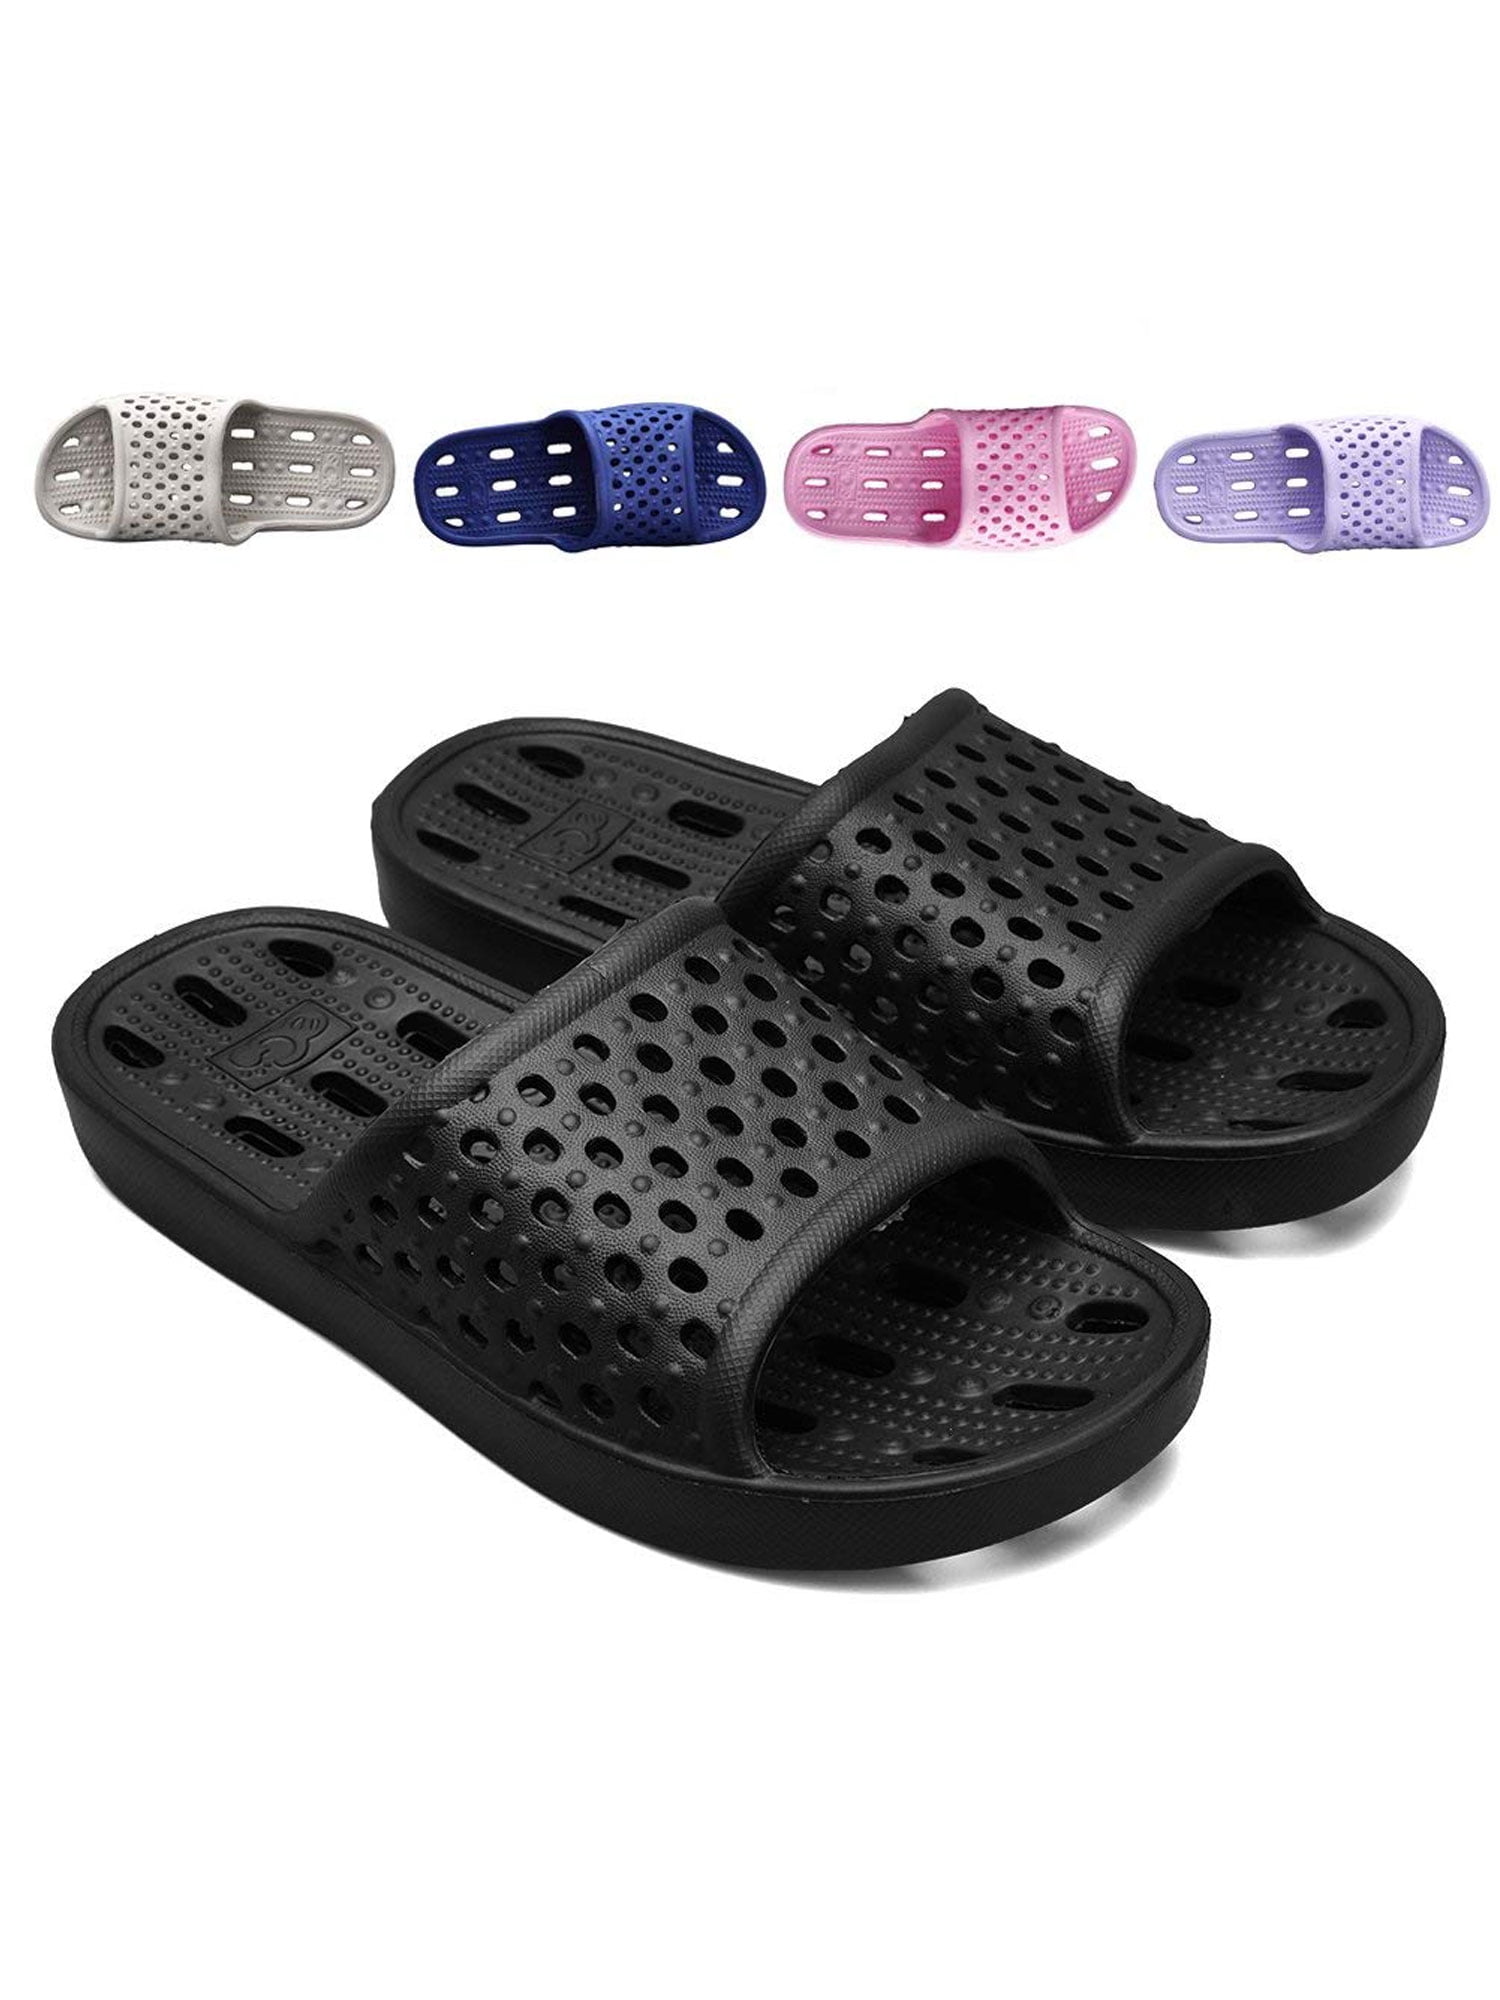 Own Shoe - Shower Shoes for Mens and Womens Bathroom Slippers Non Slip ...